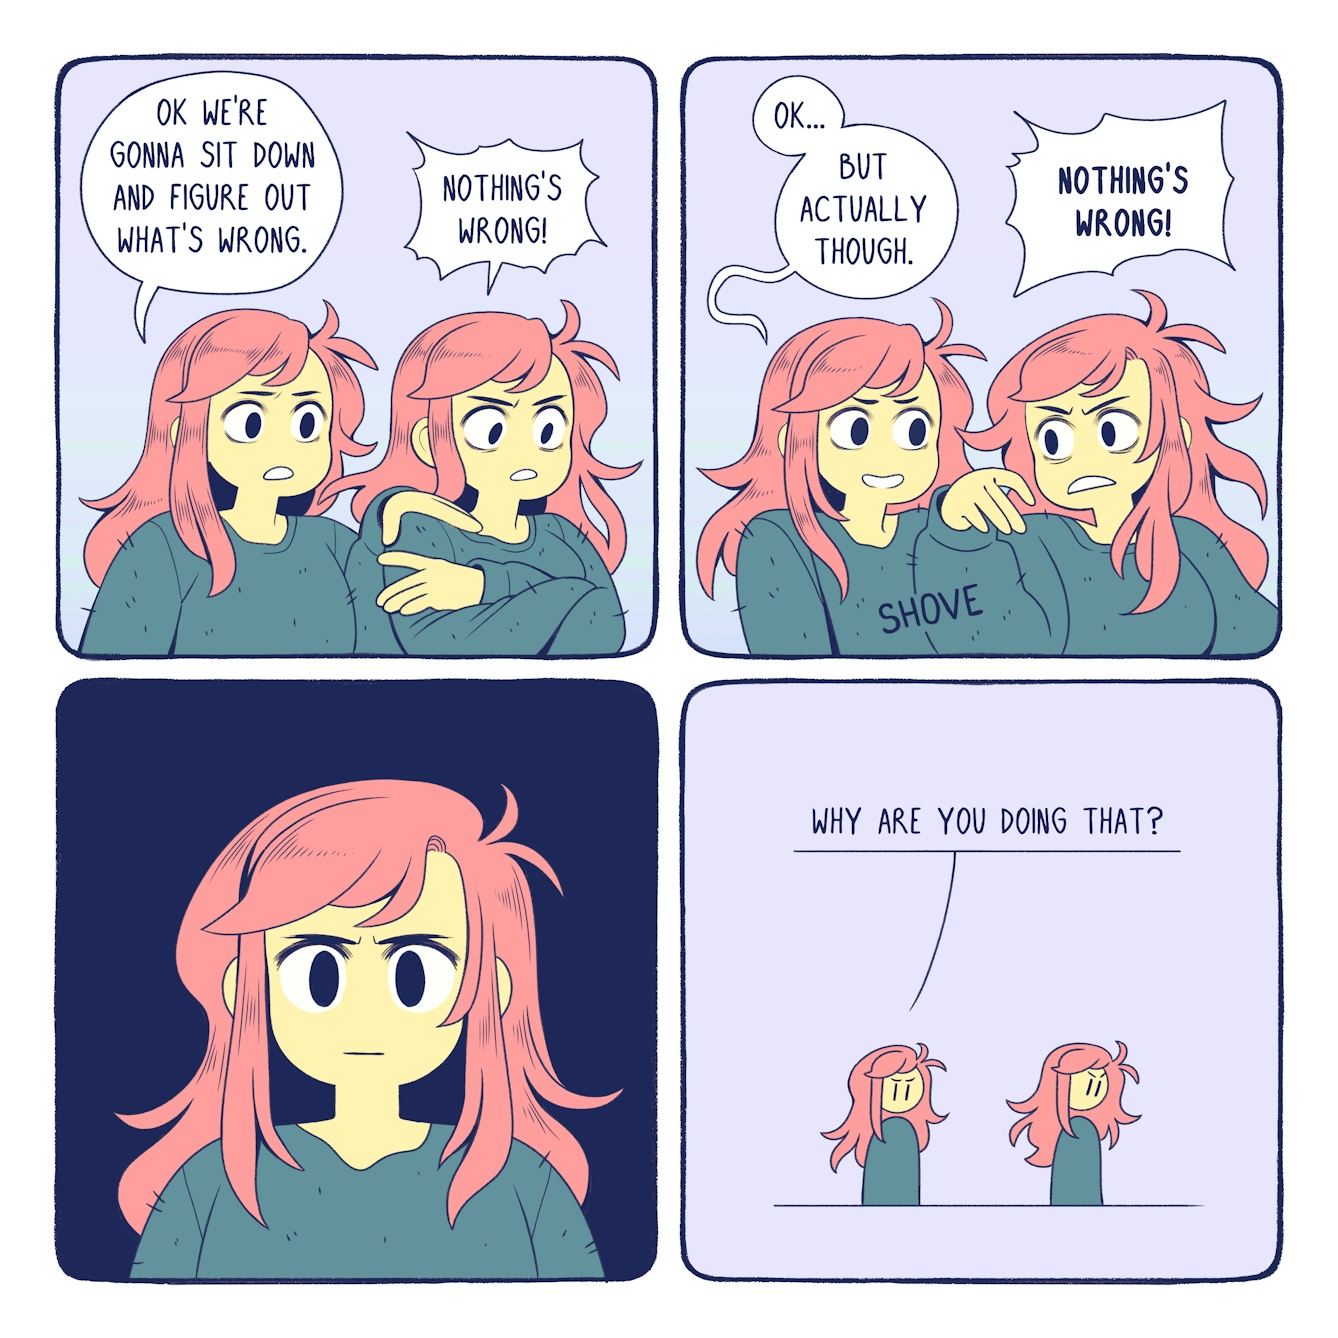 Colourful four panel comic with a pale purple background. The same character, a girl with long pink hair and a dark green jumper, appears several times. In the first panel the girl appears twice, looking startled with wide eyes and raised eyebrows. A speech bubble comes from the girl on the left and reads 'Ok we're gonna sit down and figure out what's wrong'. The girl on the right has her arms crossed to her chest. A speech bubble from her reads 'Nothing's wrong!' In the second panel the girl appears twice. The girl on the left is smiling at the girl on the right, who looks toward the girl on the left with an agitated expression and her arm raised. The word 'Shove' is shown between the two girls. A speech bubble comes from the girl on the left and says 'Ok... But actually though'. A thought bubble comes from the girl on the right and reads 'Nothing's wrong!' The third panel shows the same girl close up, looking anxious. There is a dark blue background. The fourth panel shows the same girl who appears twice in the distance. The girl on the left is looking at the girl on the right, who is turned away from the girl on the left and looking down. A speech bubble comes from the girl on the left and reads 'Why are you doing that?' 